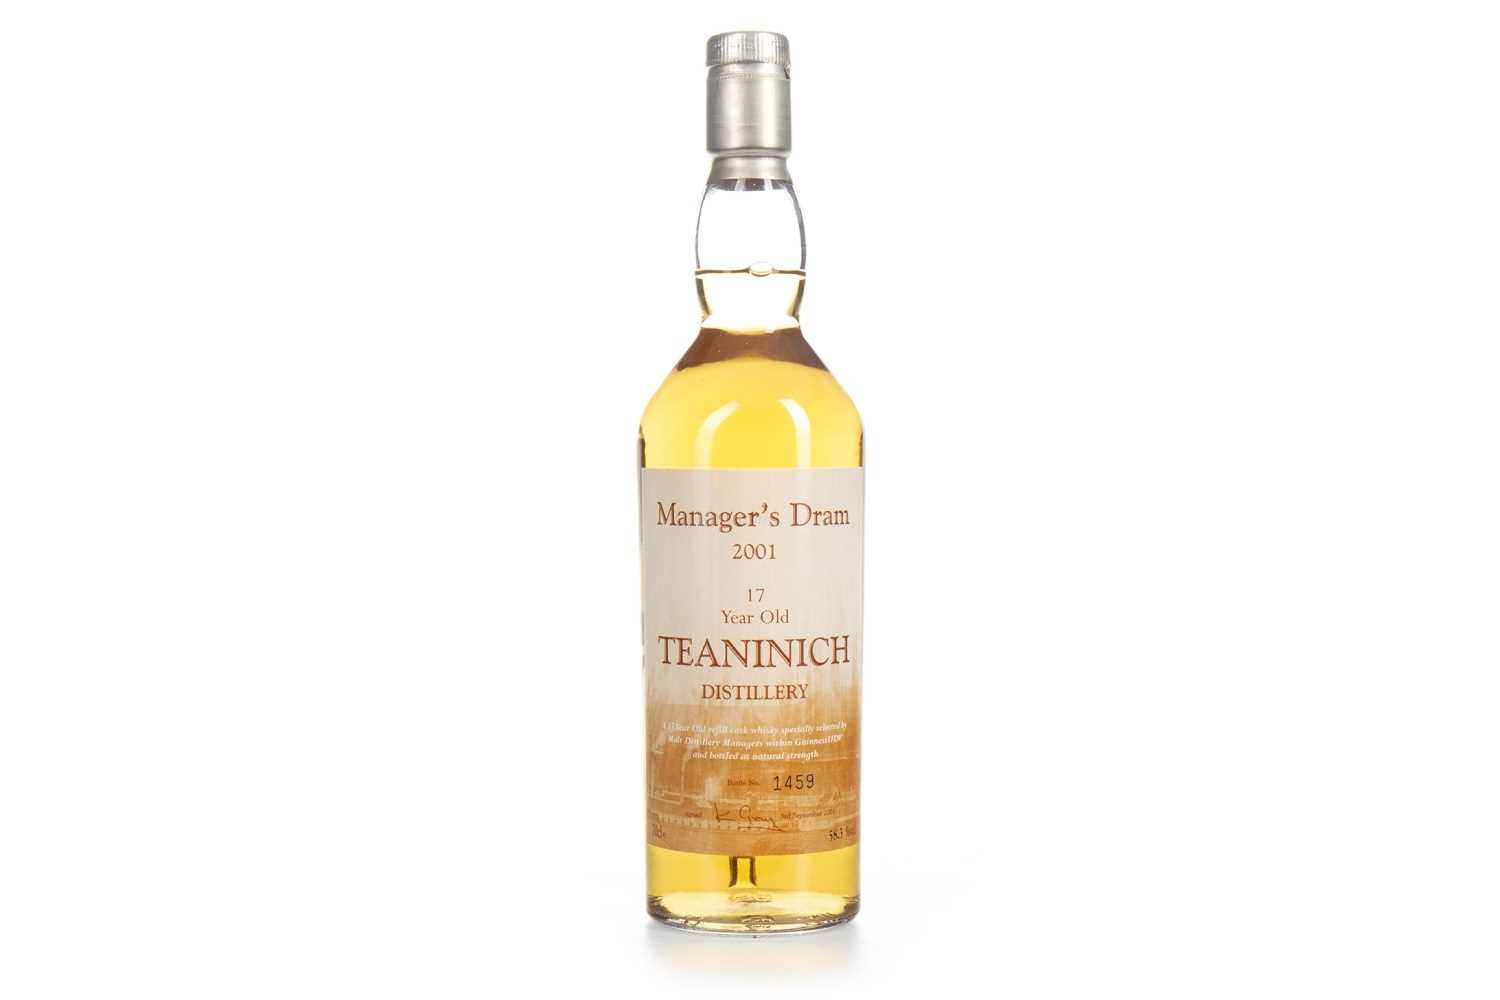 Lot 102 - TEANINICH THE MANAGERS DRAM AGED 17 YEARS